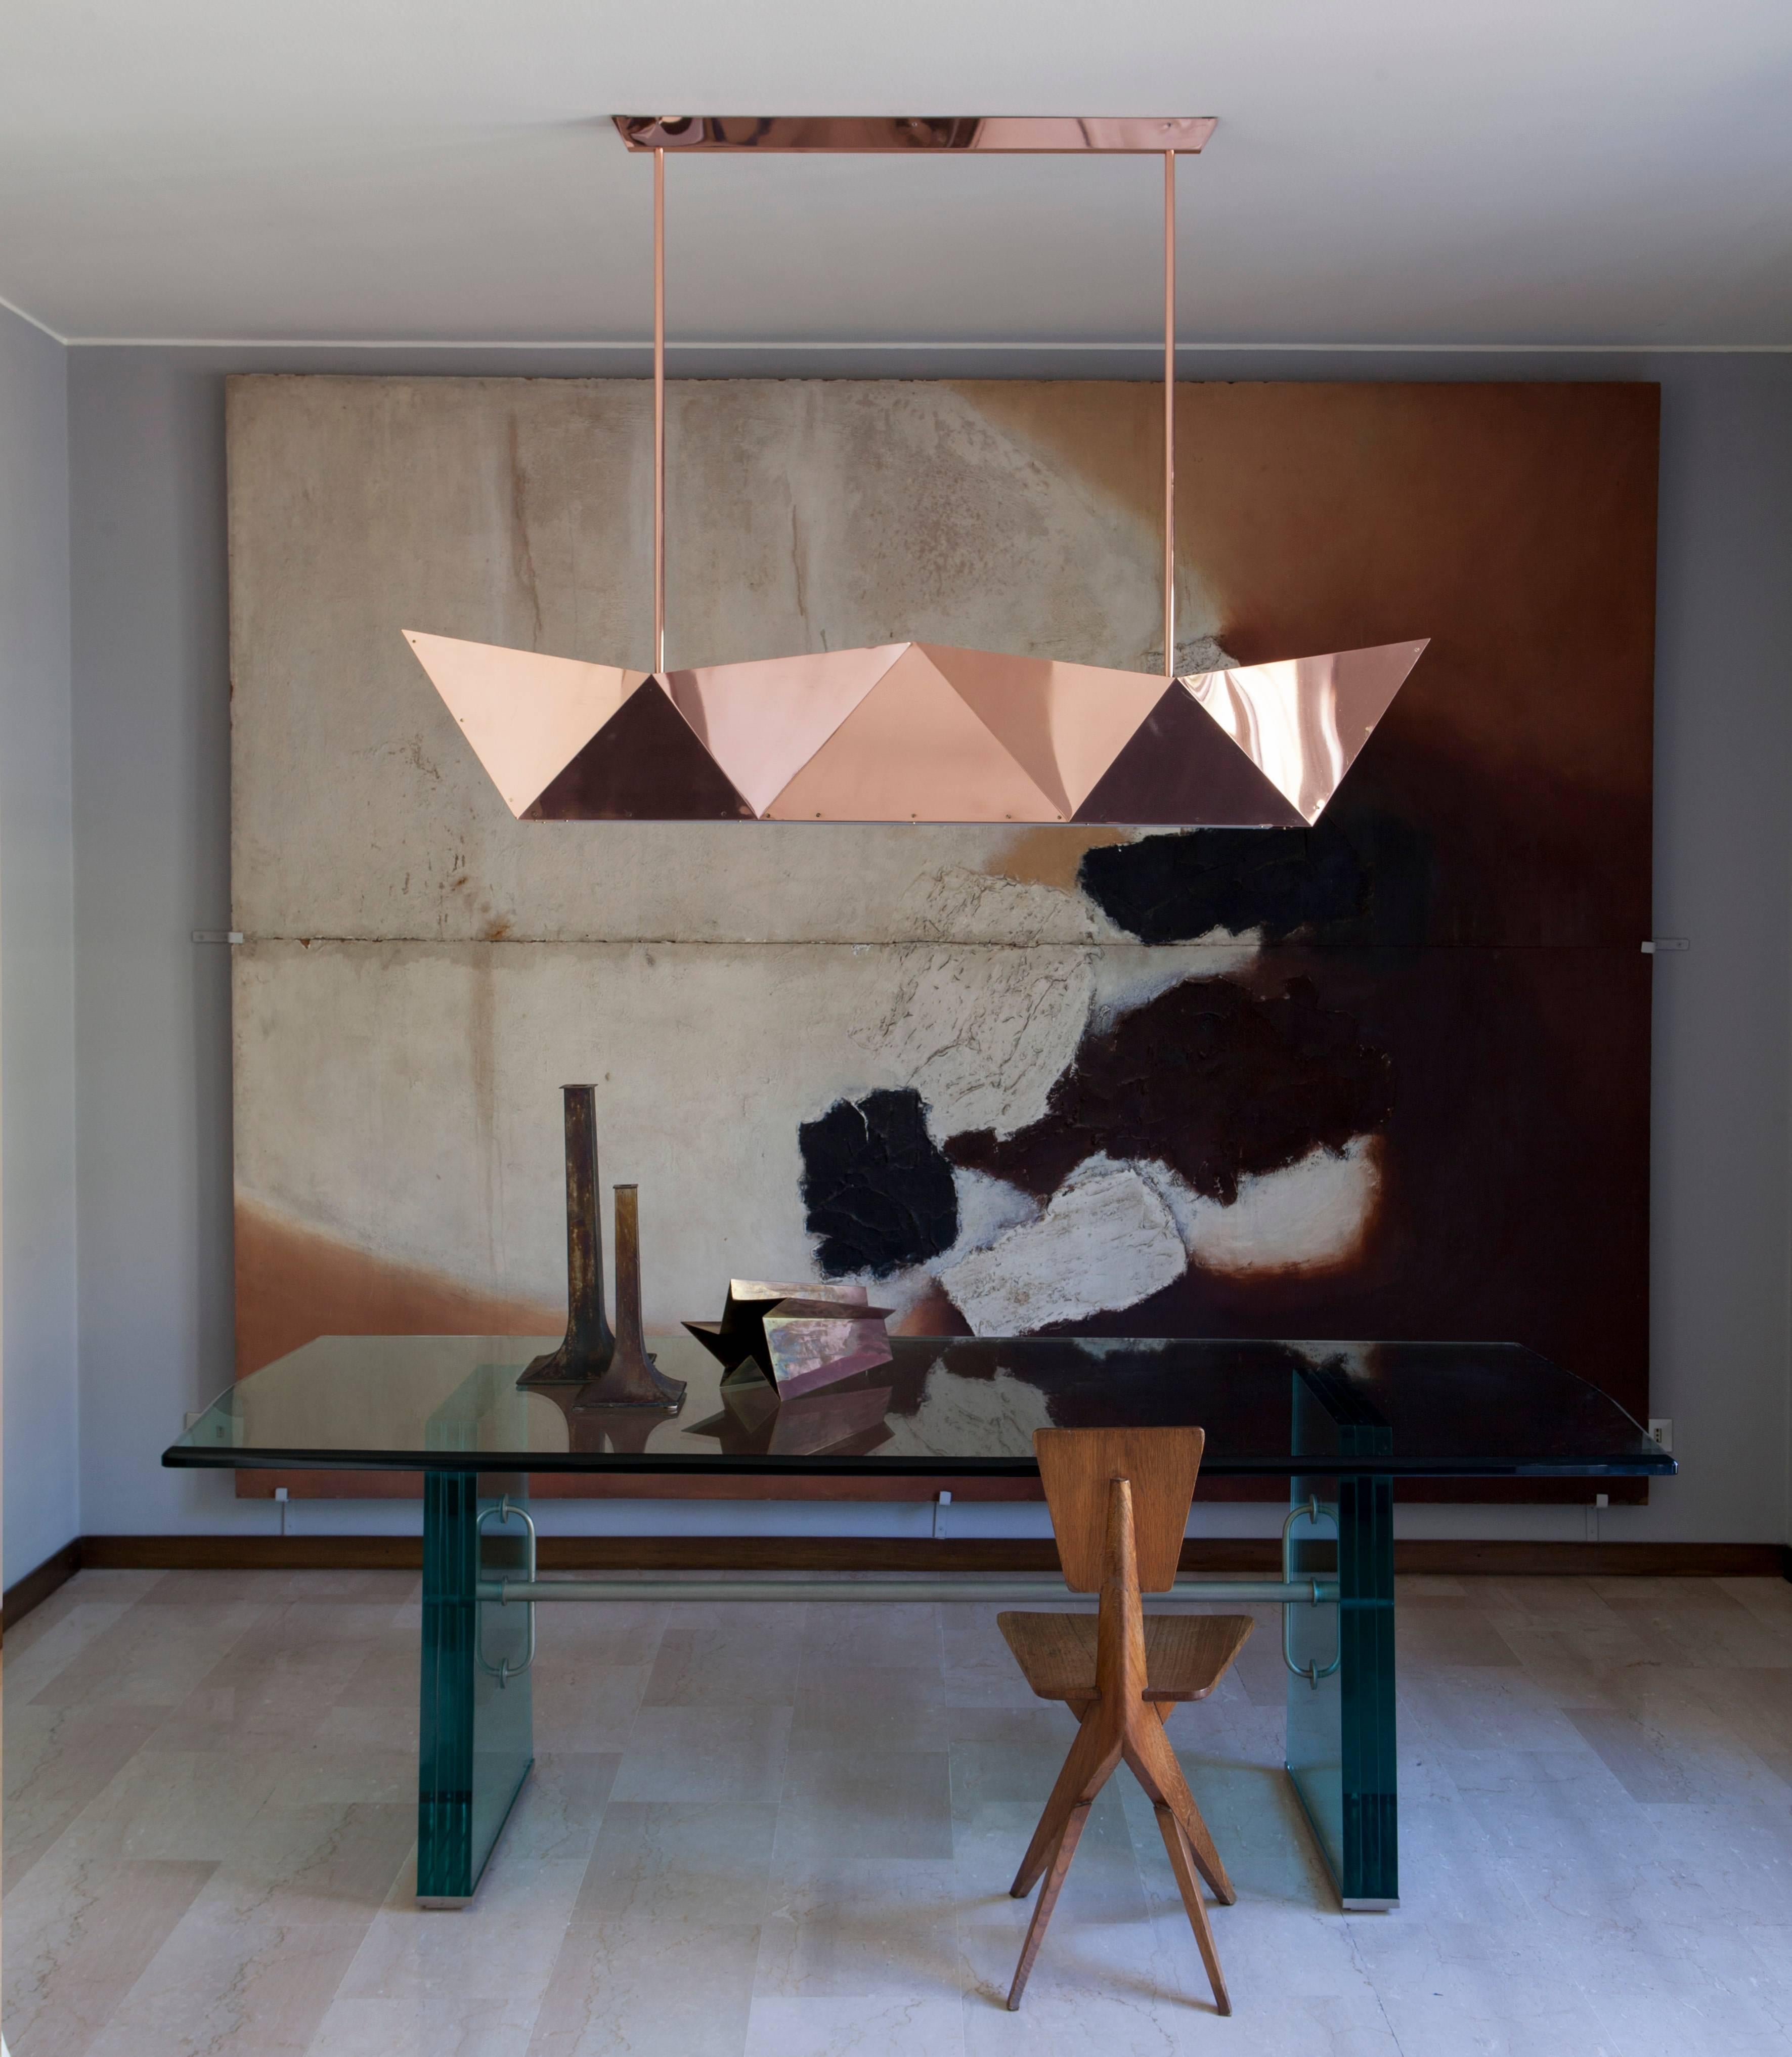 Deriva is a hanging lamp with direct and indirect LED light, an evolution of the ceiling light fixtures especially designed for Fragile's new location in the centre of Milan. It was designed by Alessandro Mendini for Fragile Edizioni on the occasion